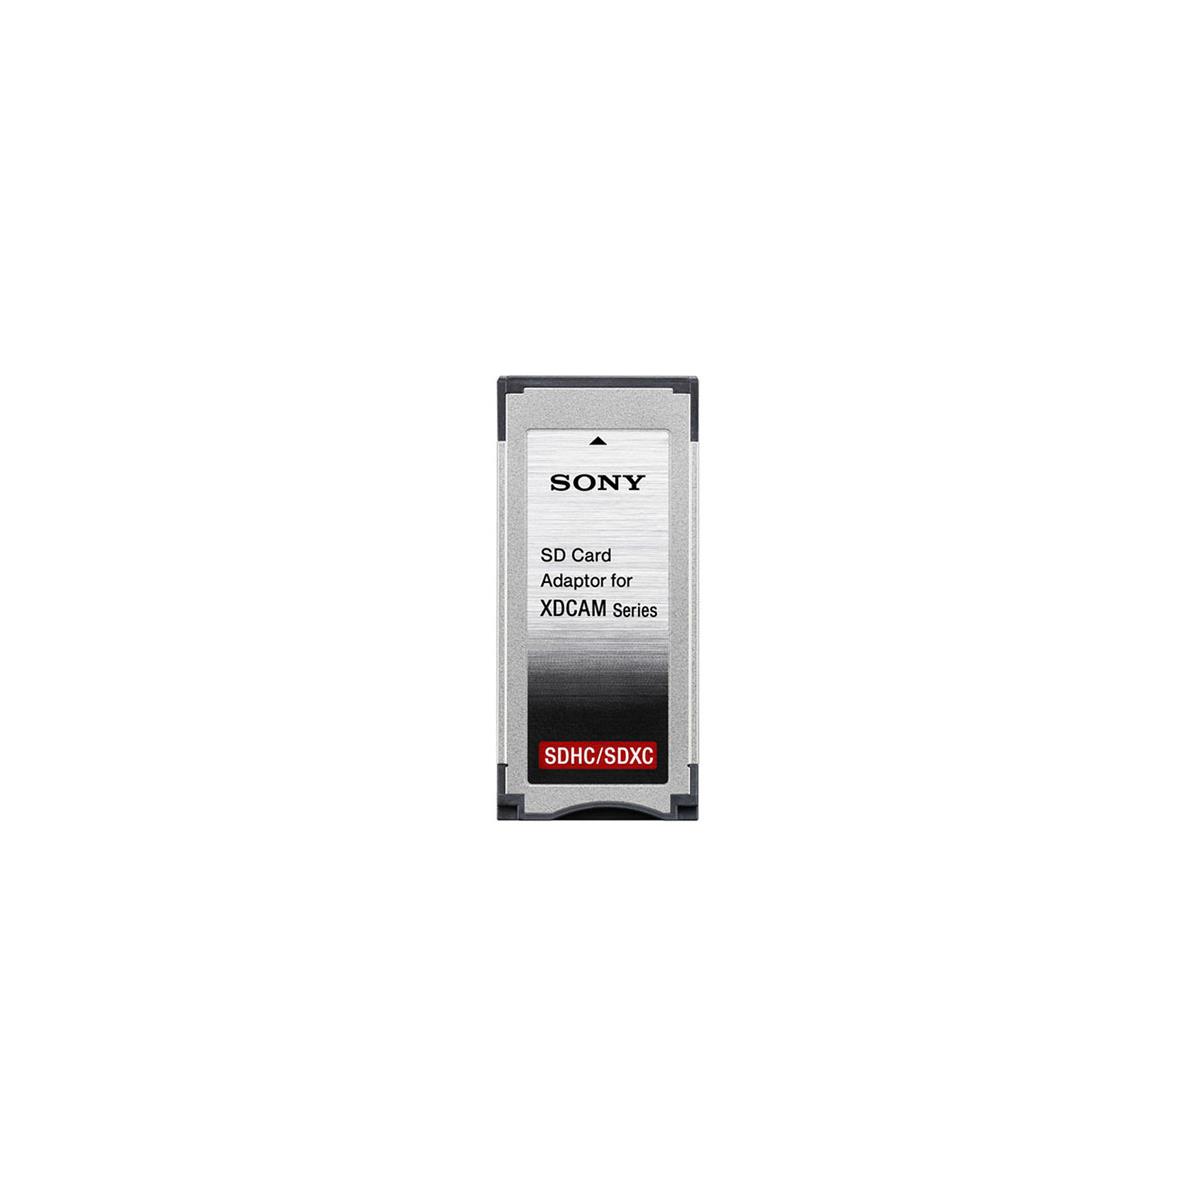 Image of Sony MEAD-SD02 SDHC/SDXC Card Adapter for XDCAM EX Camcorders/Equipment